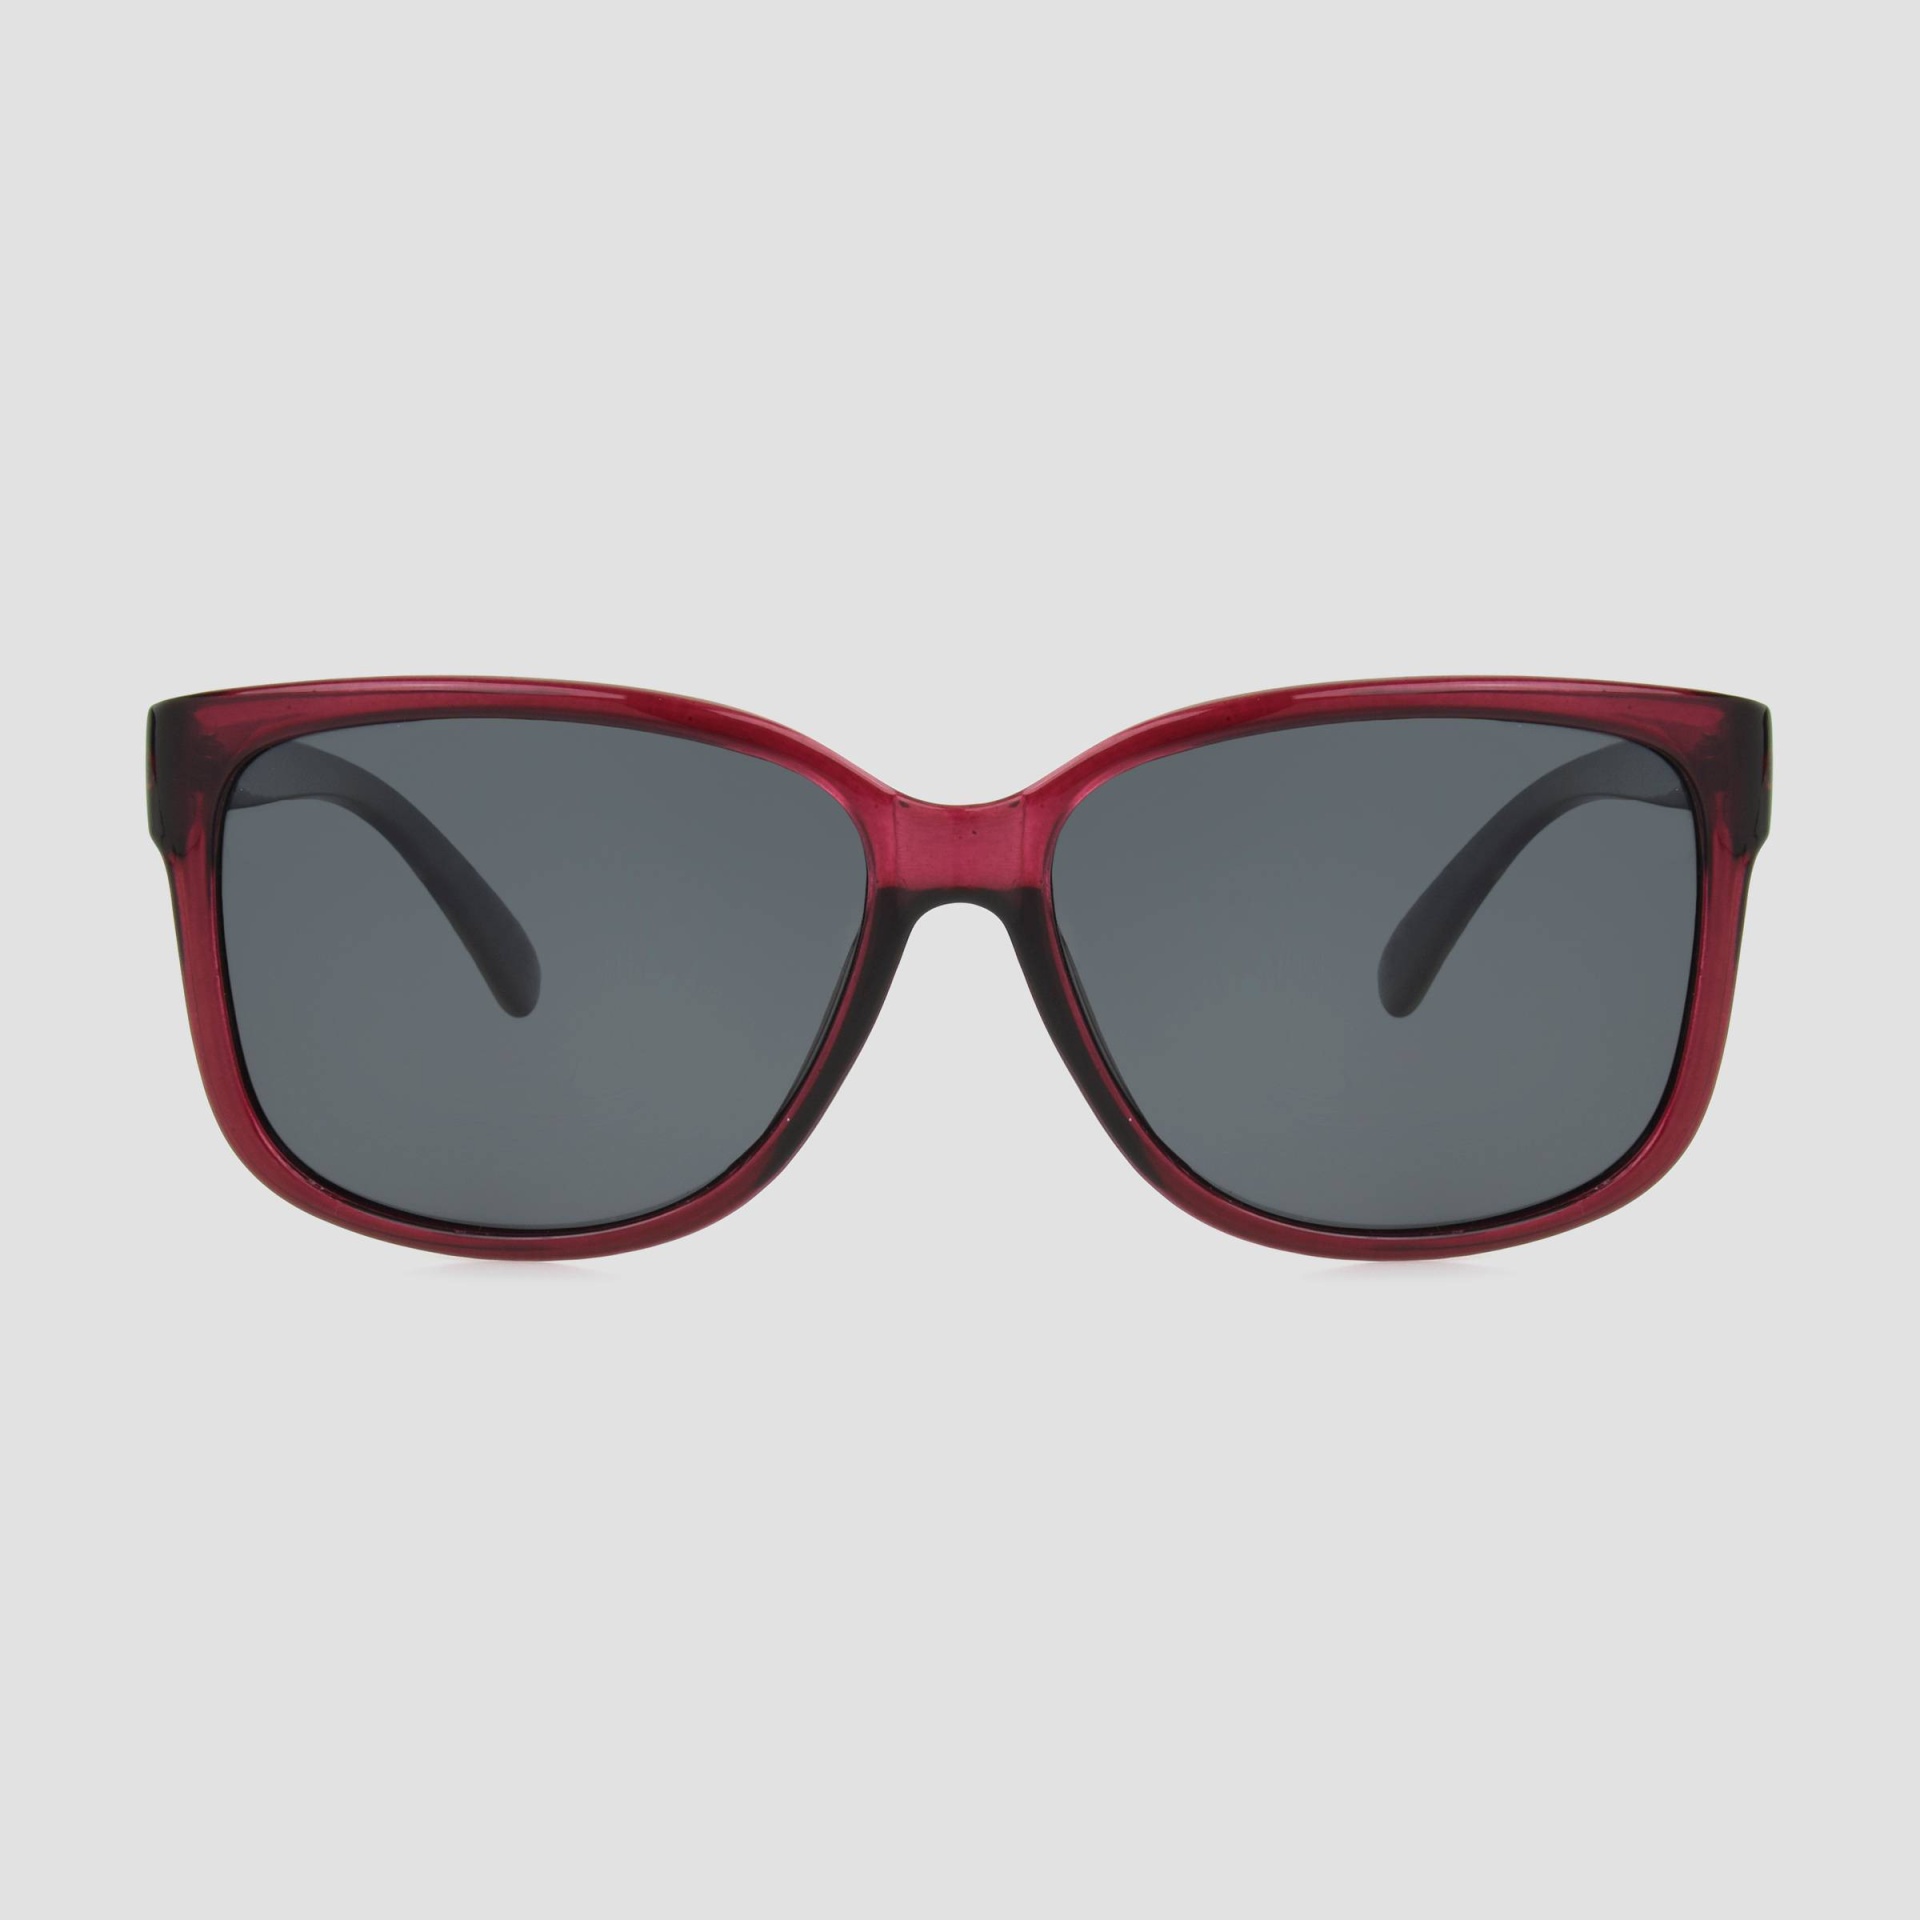 slide 1 of 2, Women's Square Crystal Sunglasses with Smoke Polarized Lenses - A New Day Burgundy, 1 ct